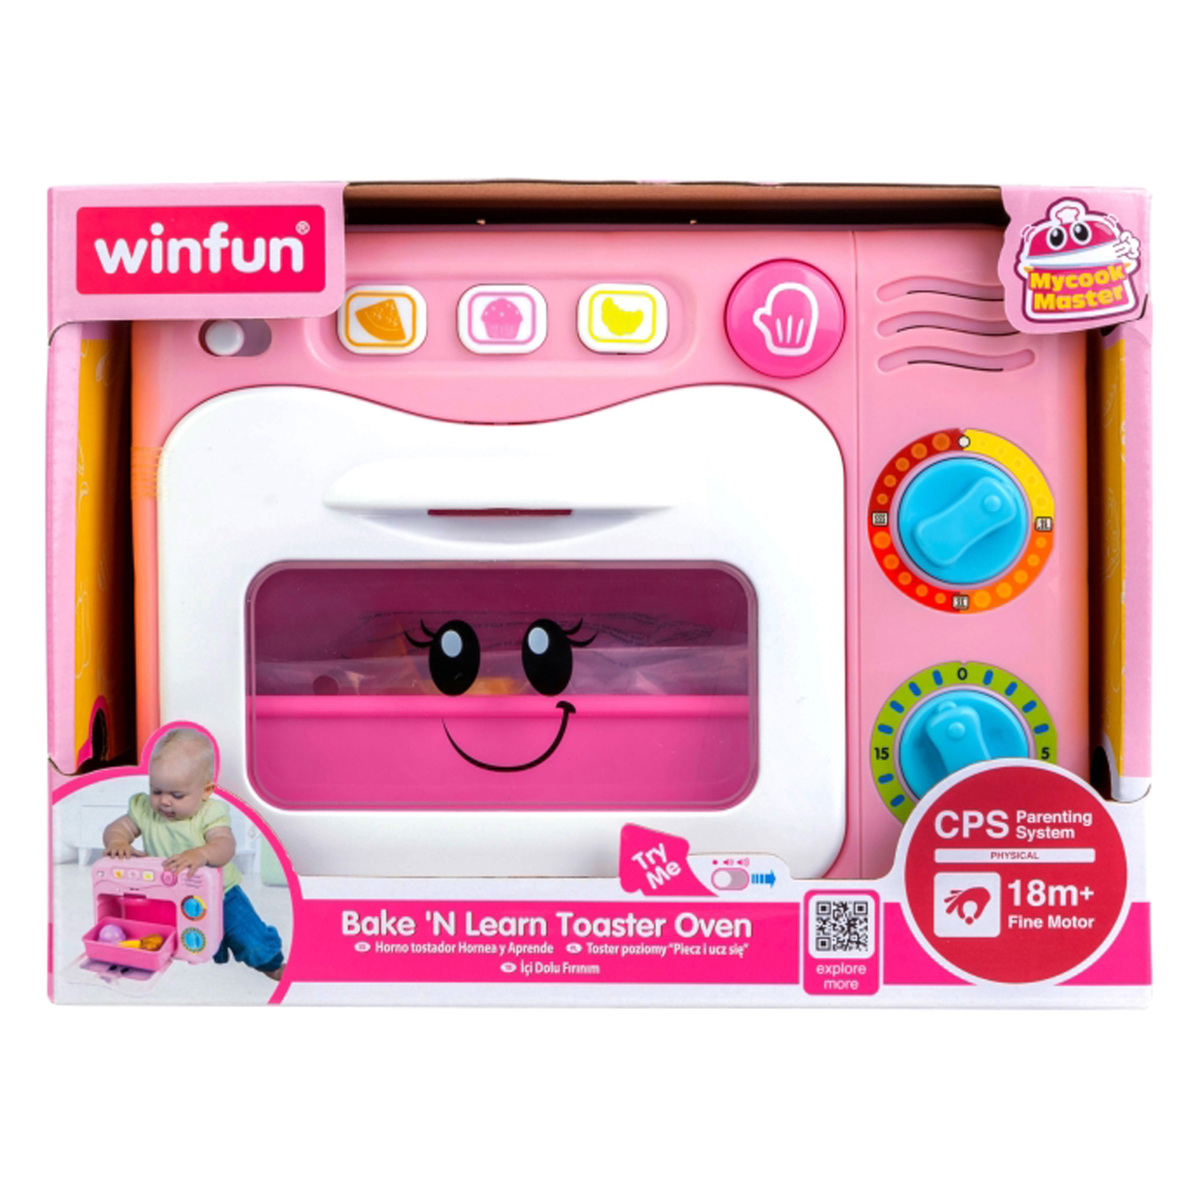 Winfun Bake 'N Learn Toaster Oven Girl, Multicolor, 0761G-01